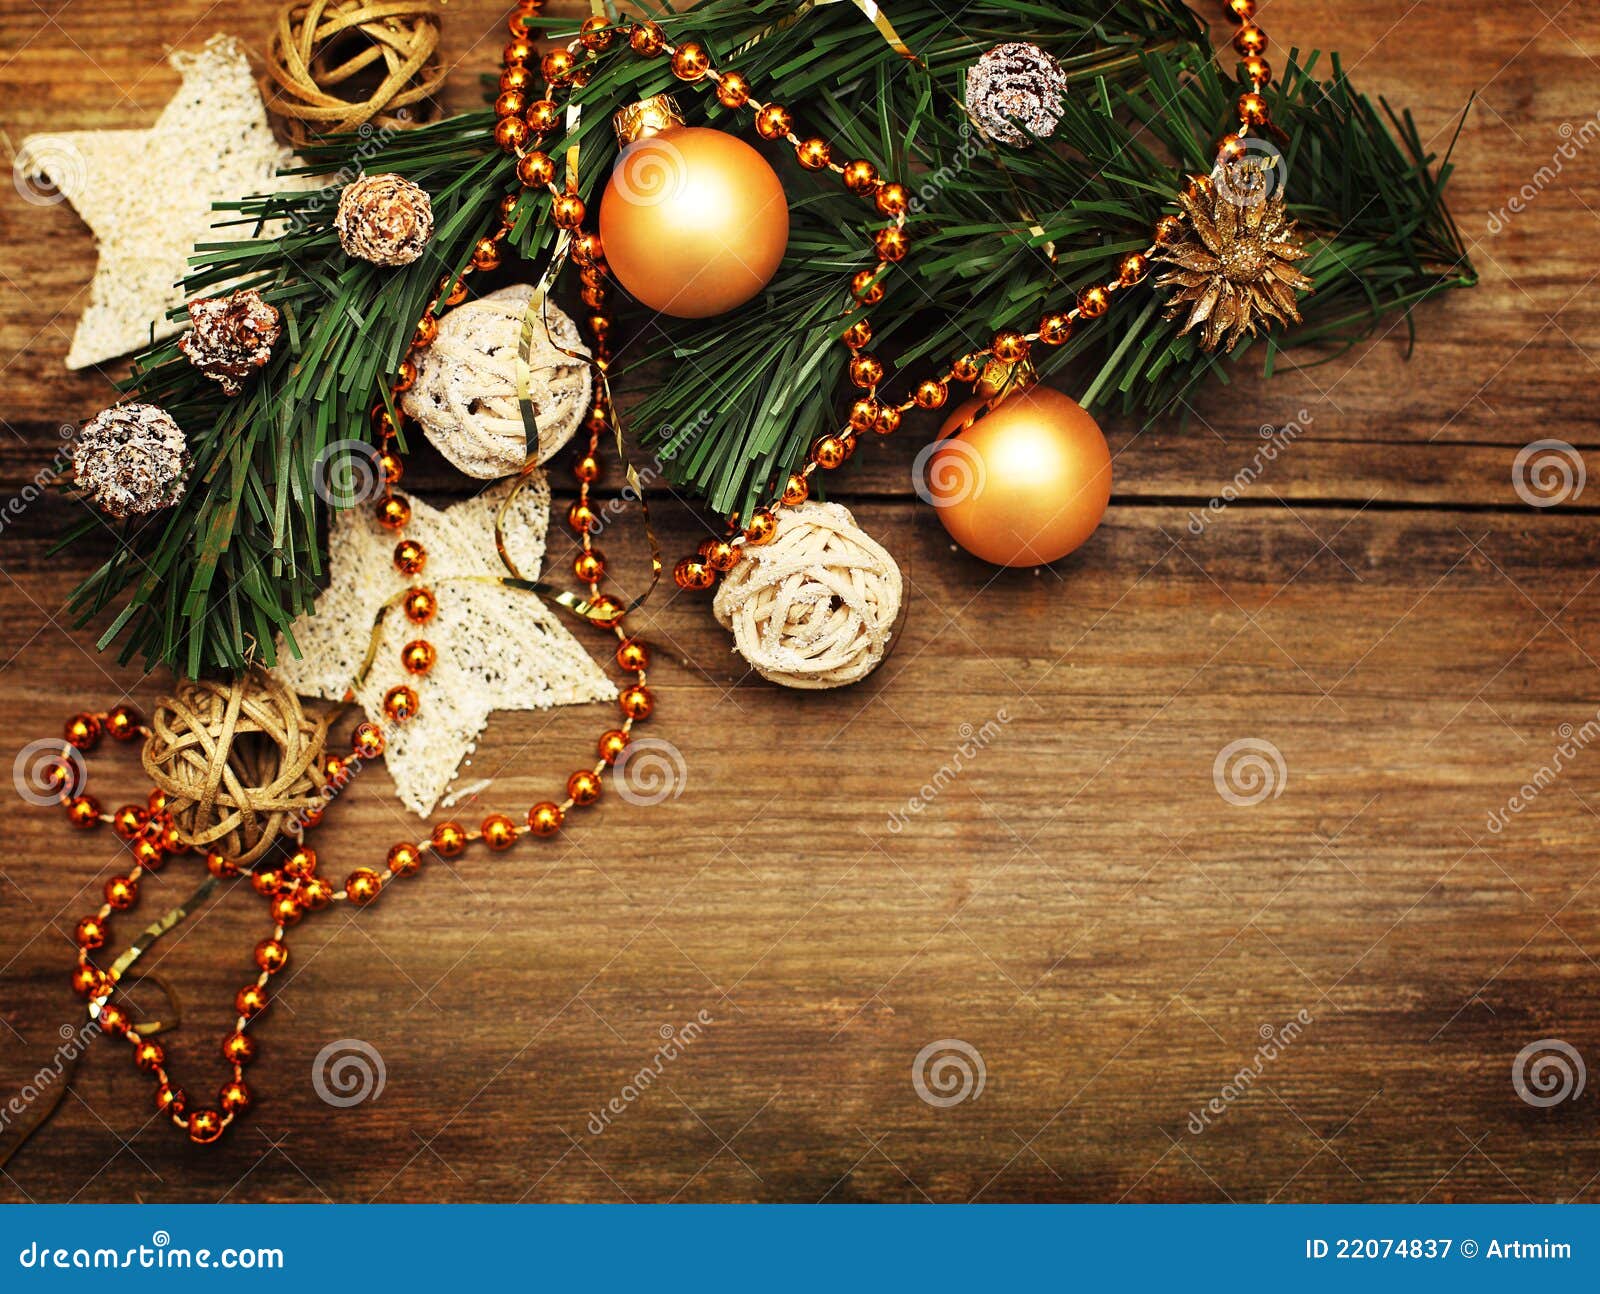 Christmas Background with Golden Decoration Stock Image - Image of star ...